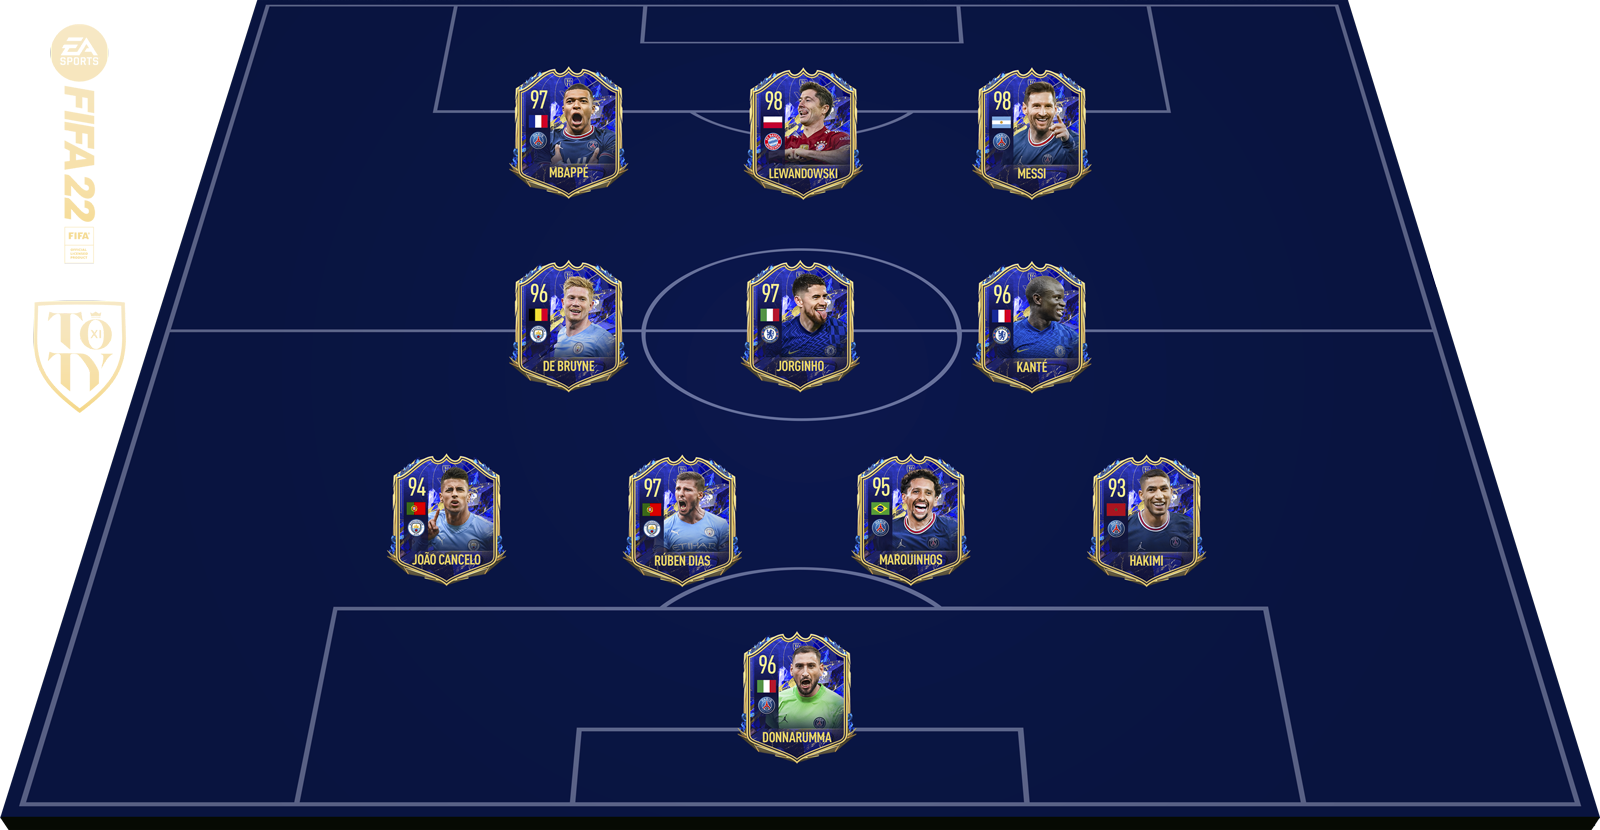 Team of the Year image